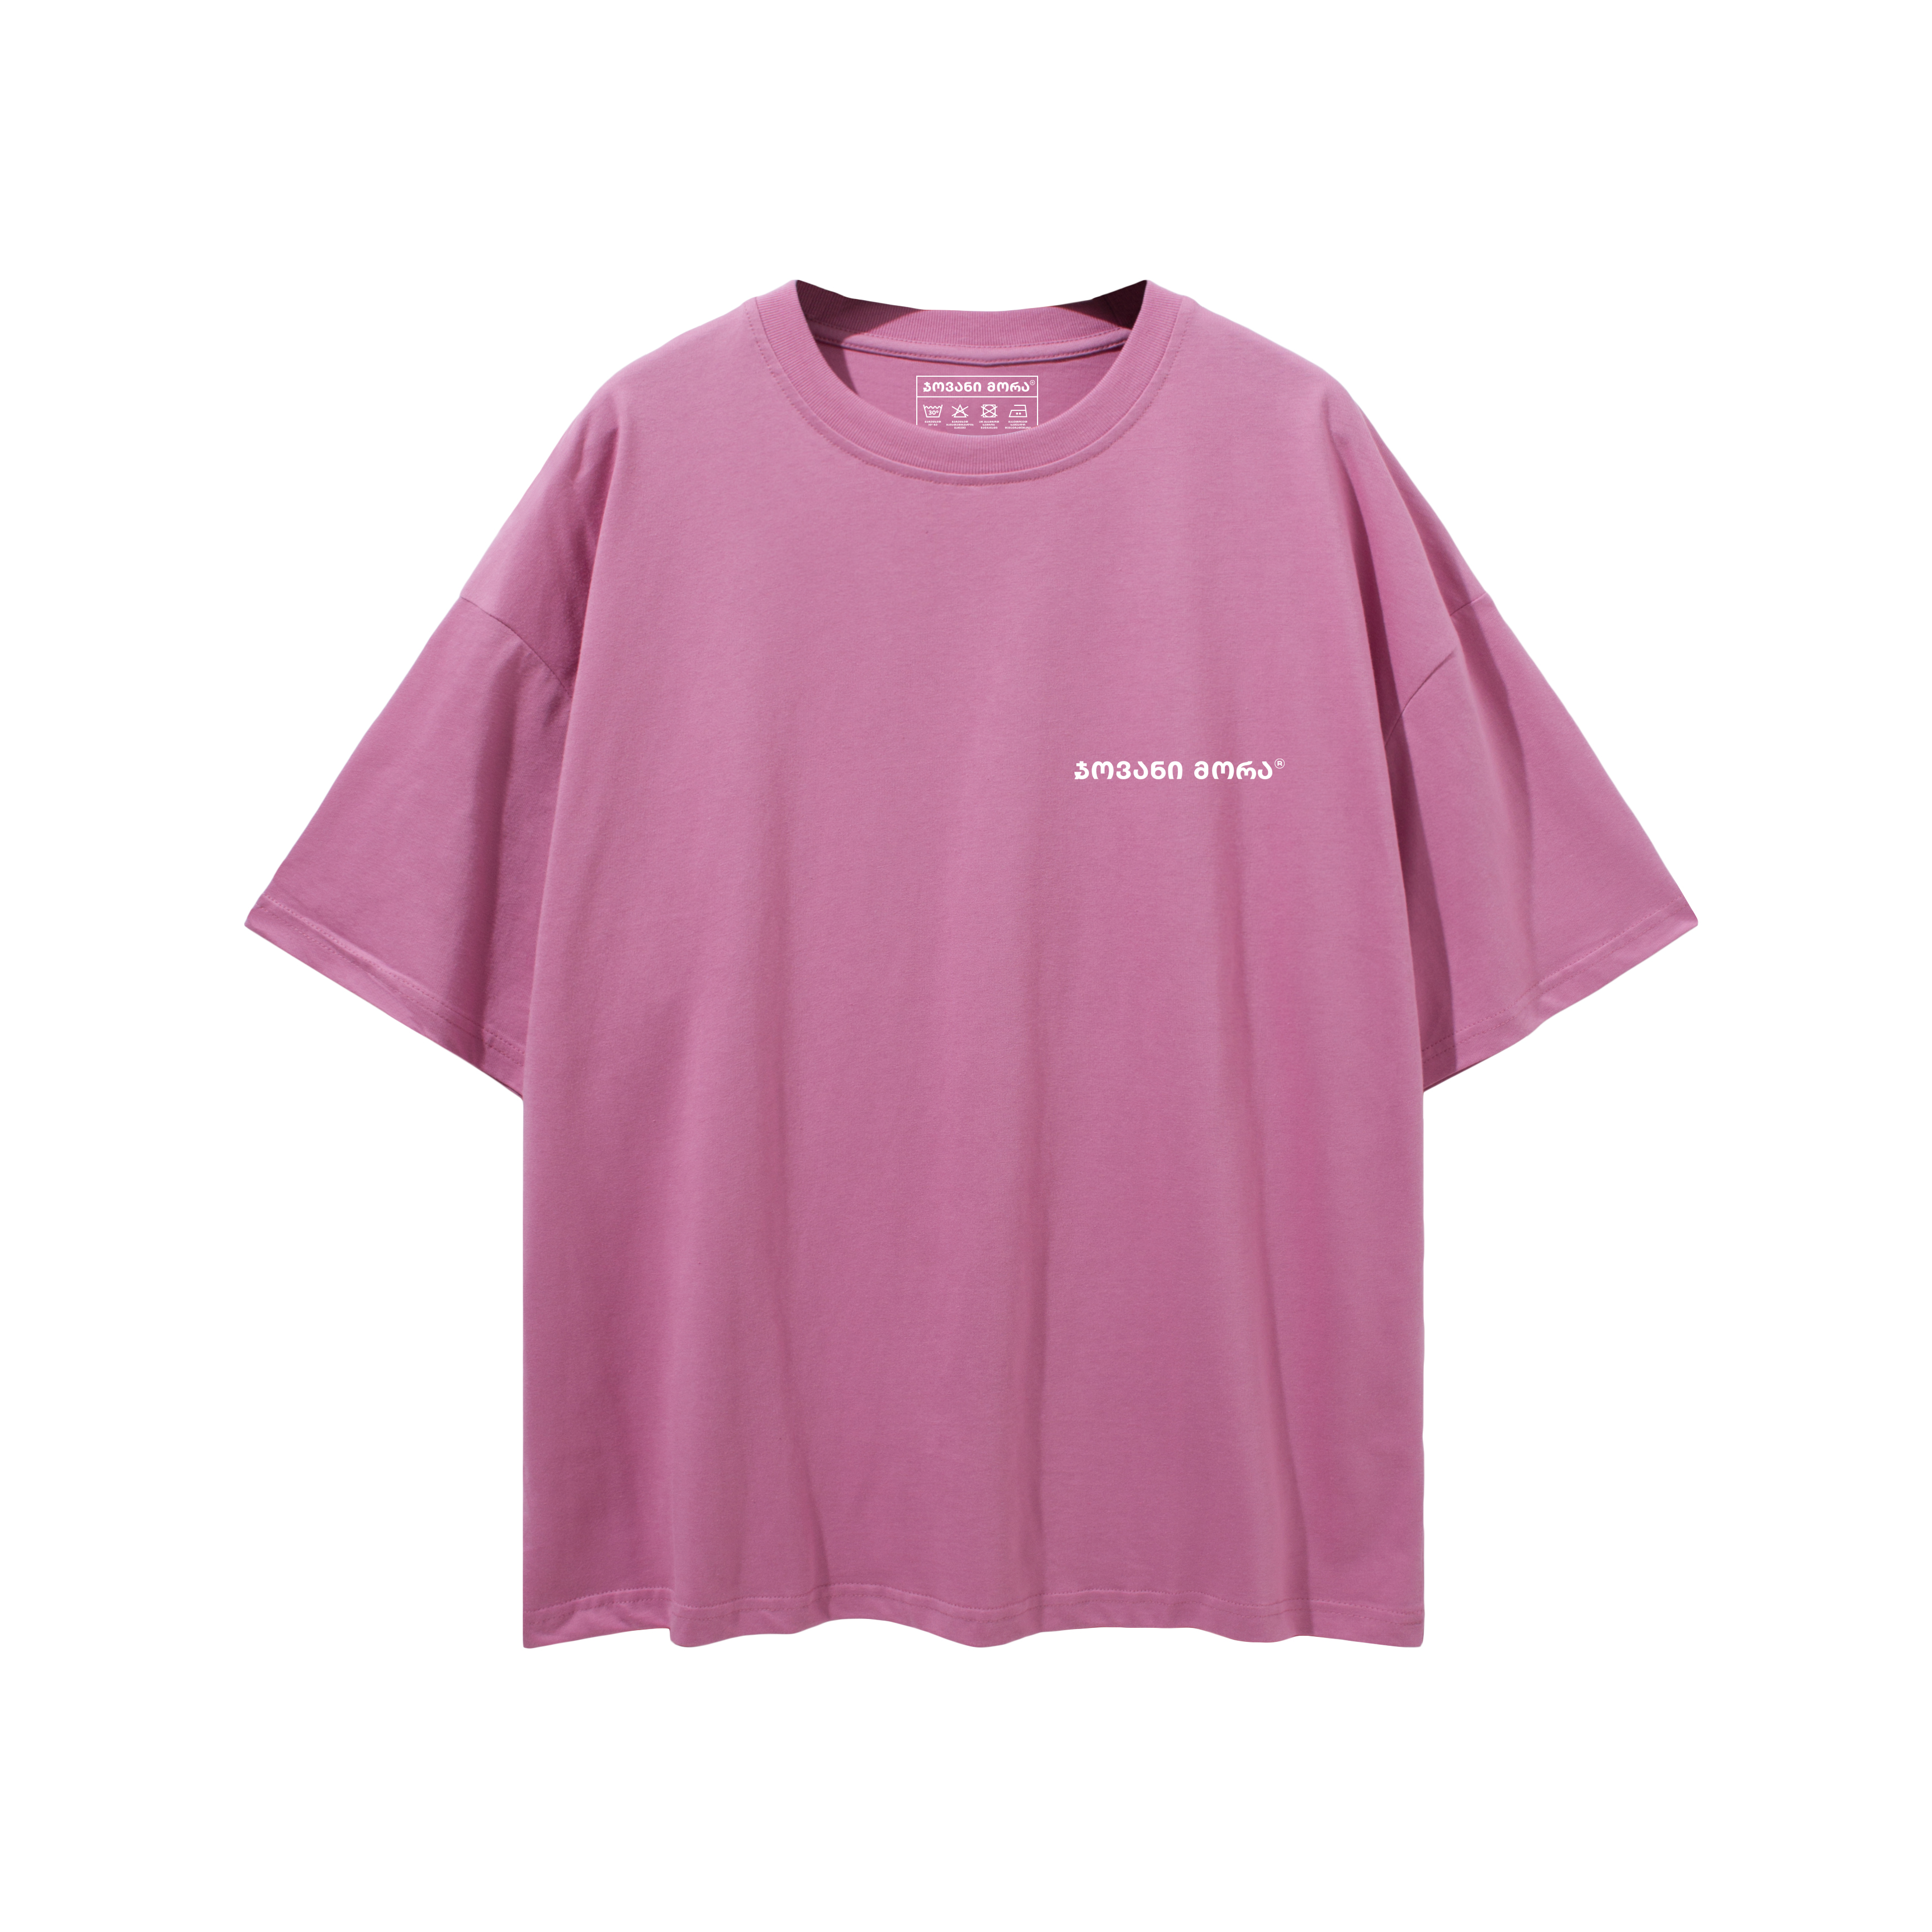 T-shirt (Pink), Oversized Fit